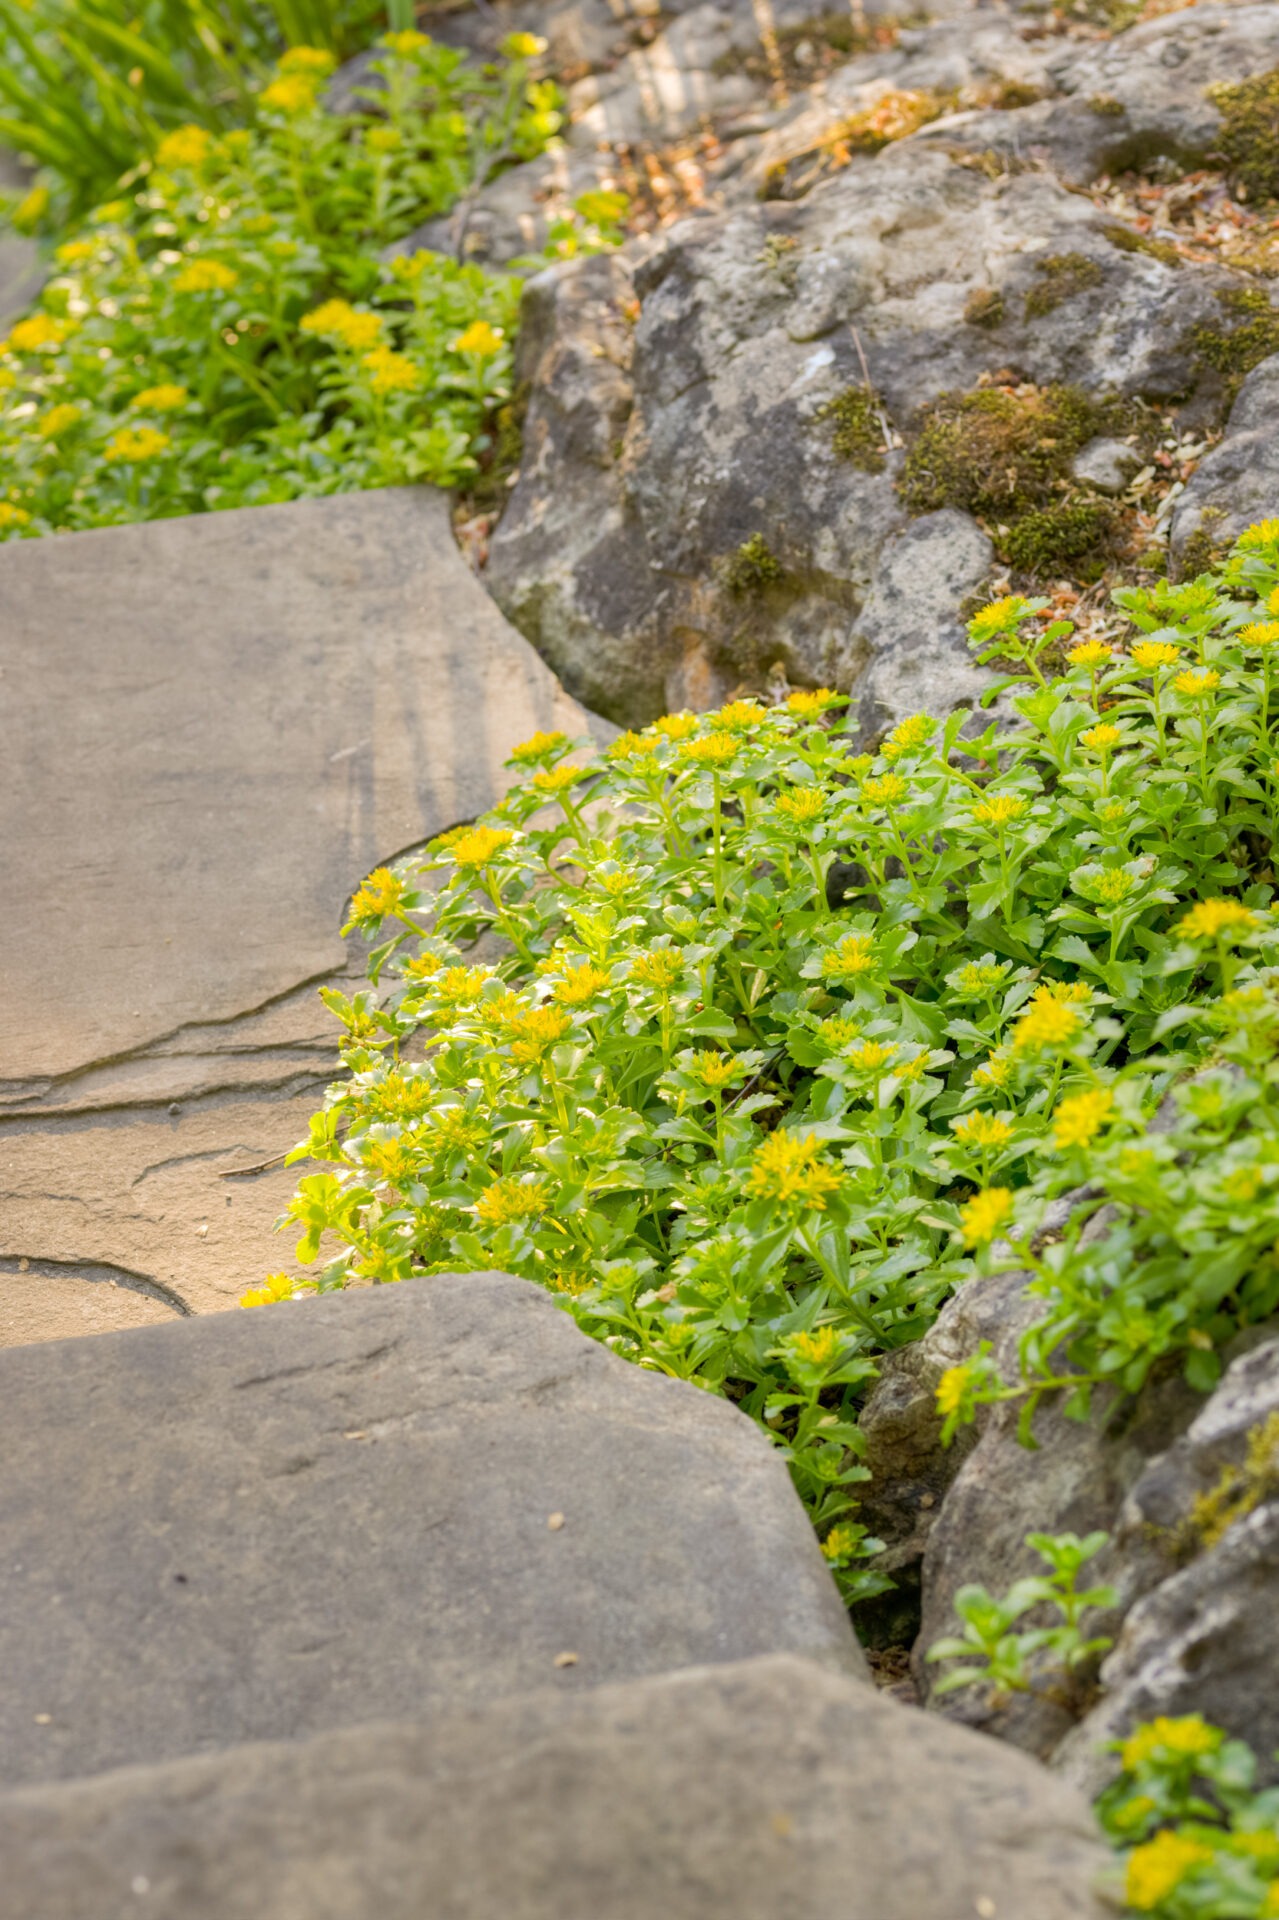 A stone pathway surrounded by lush greenery and bright yellow flowers leads through a tranquil garden with rocks and moss accents.